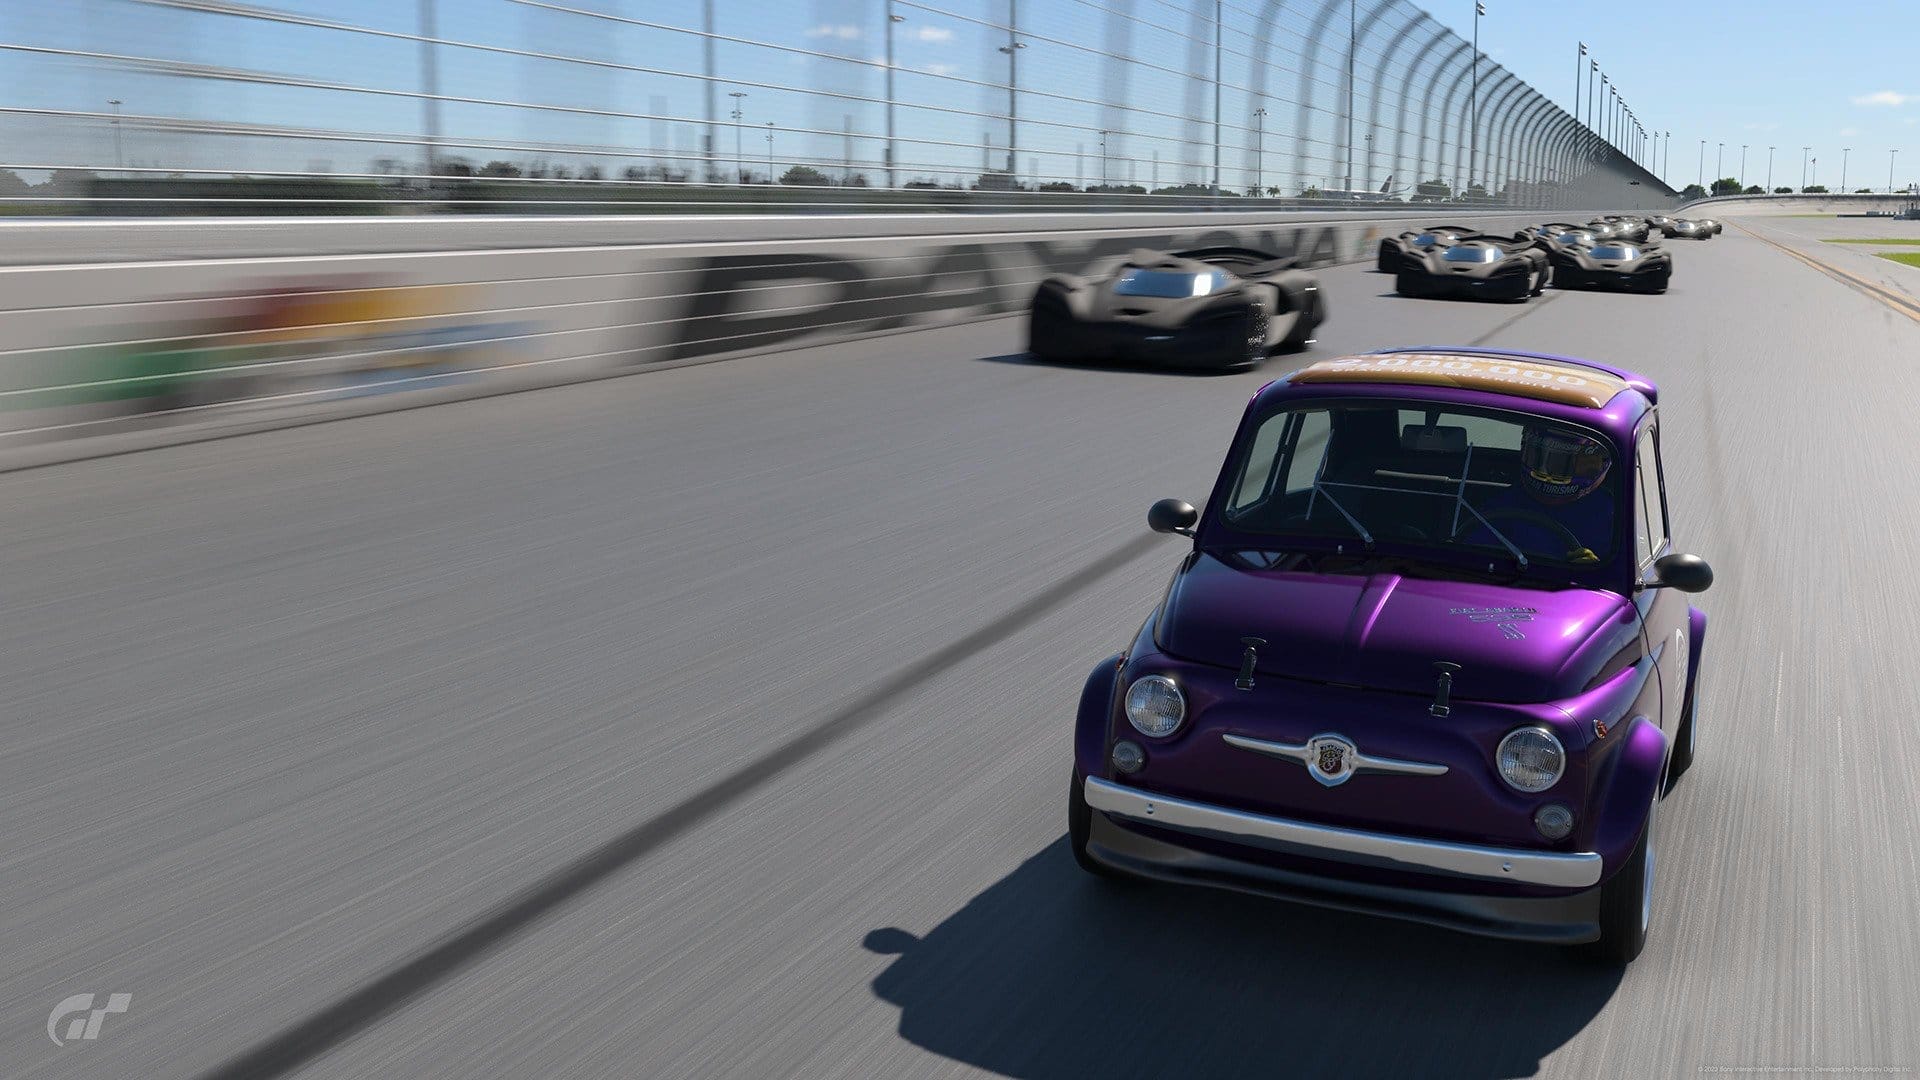 Gran Turismo 7 Easy Credit Glitch Will be Patched Soon